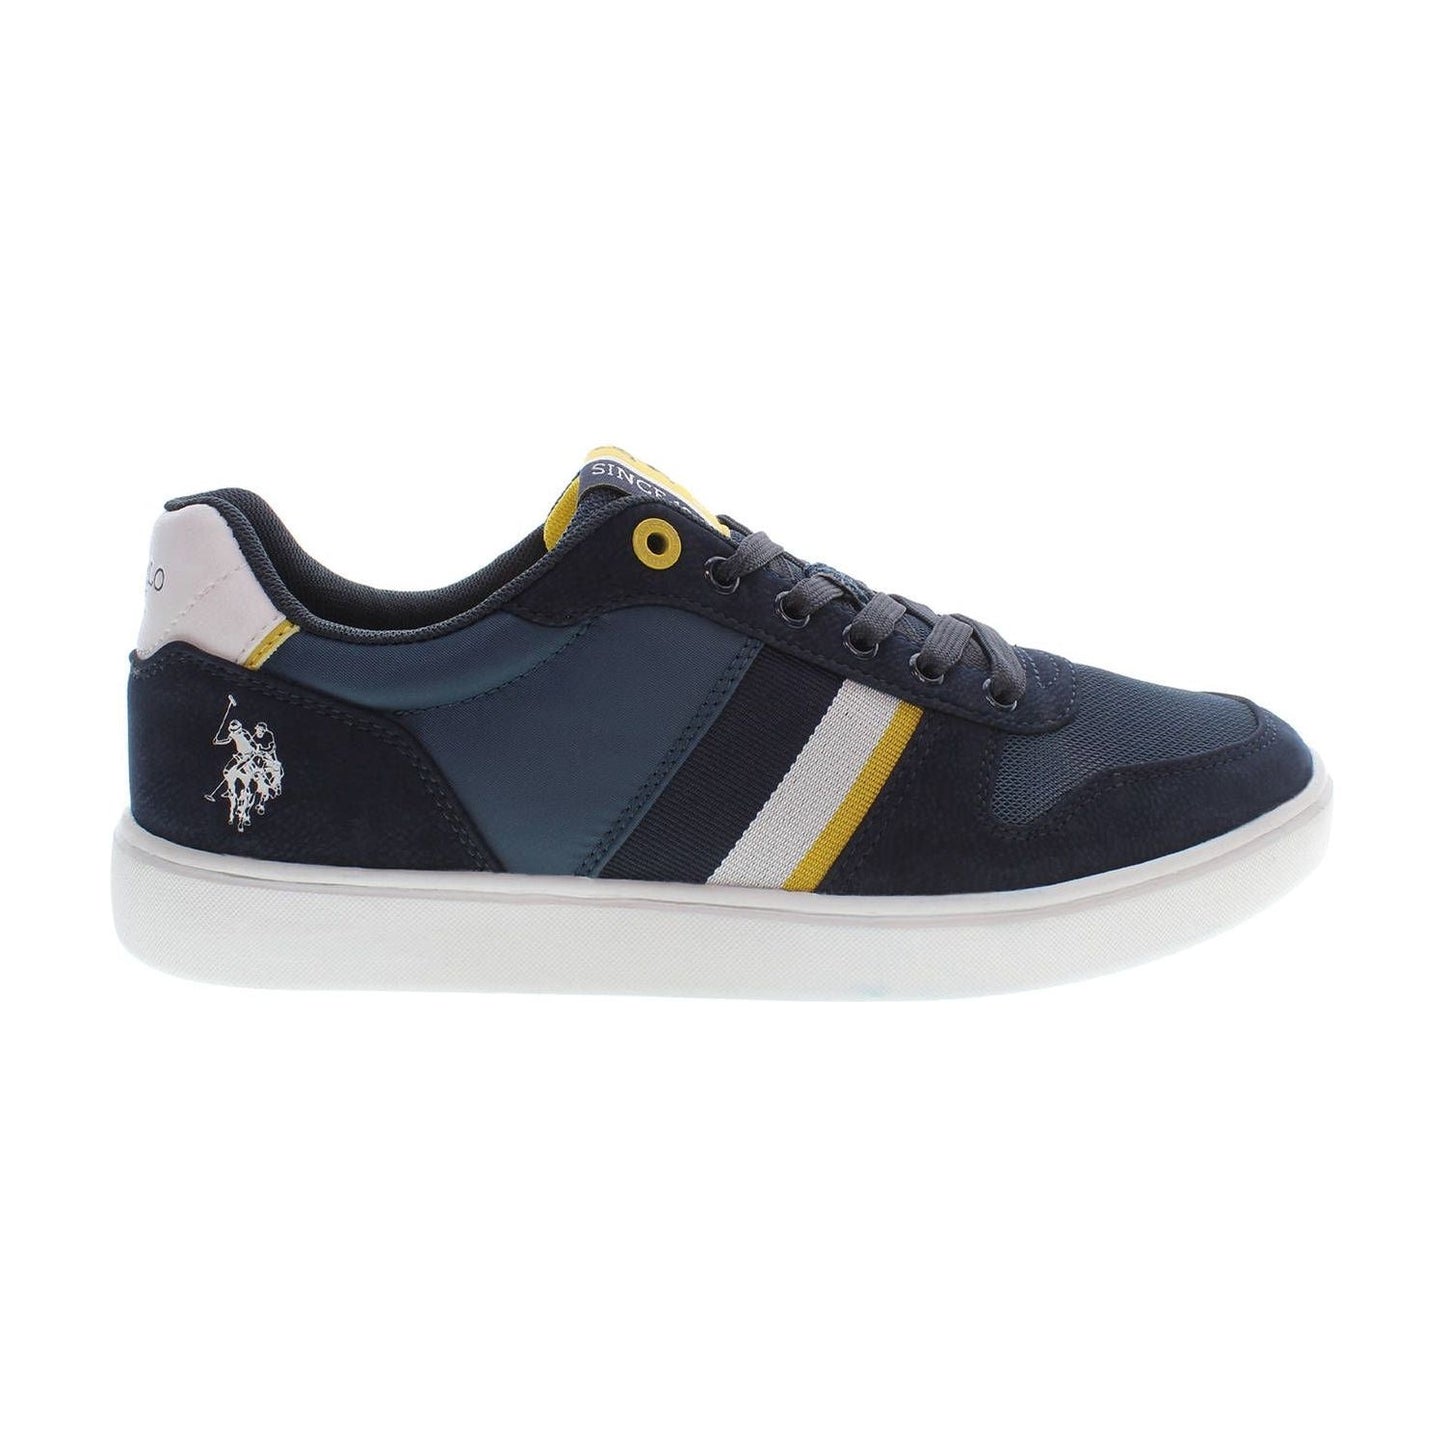 U.S. POLO ASSN. Sleek Blue Sneakers with Contrasting Details sleek-blue-sneakers-with-contrasting-details-1